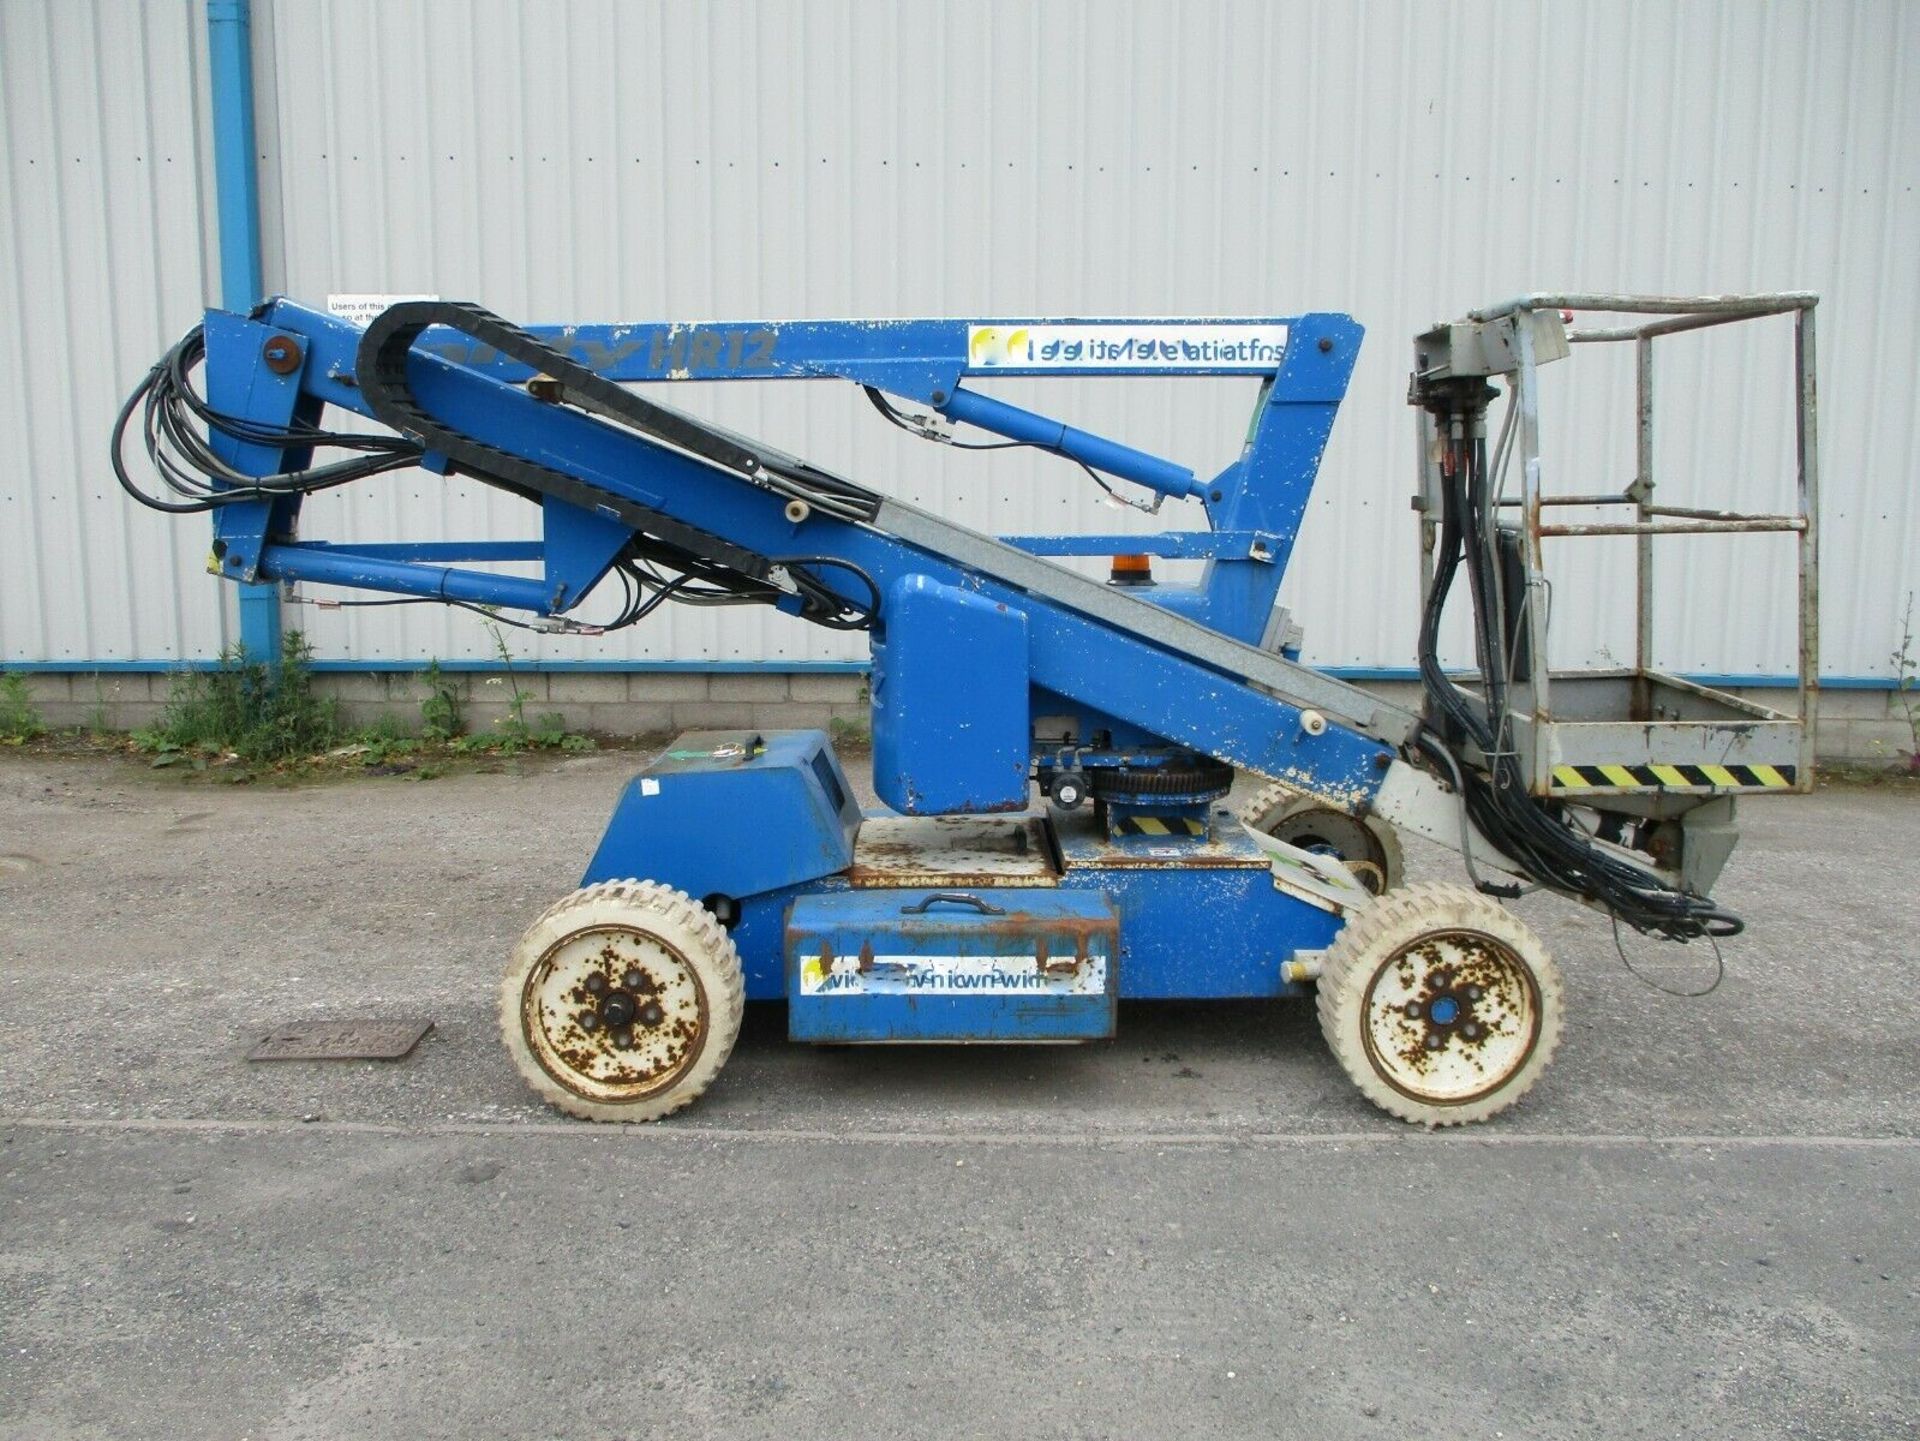 Nifty Lift HR12 Self Propelled Access Platform 2008 - Image 2 of 9